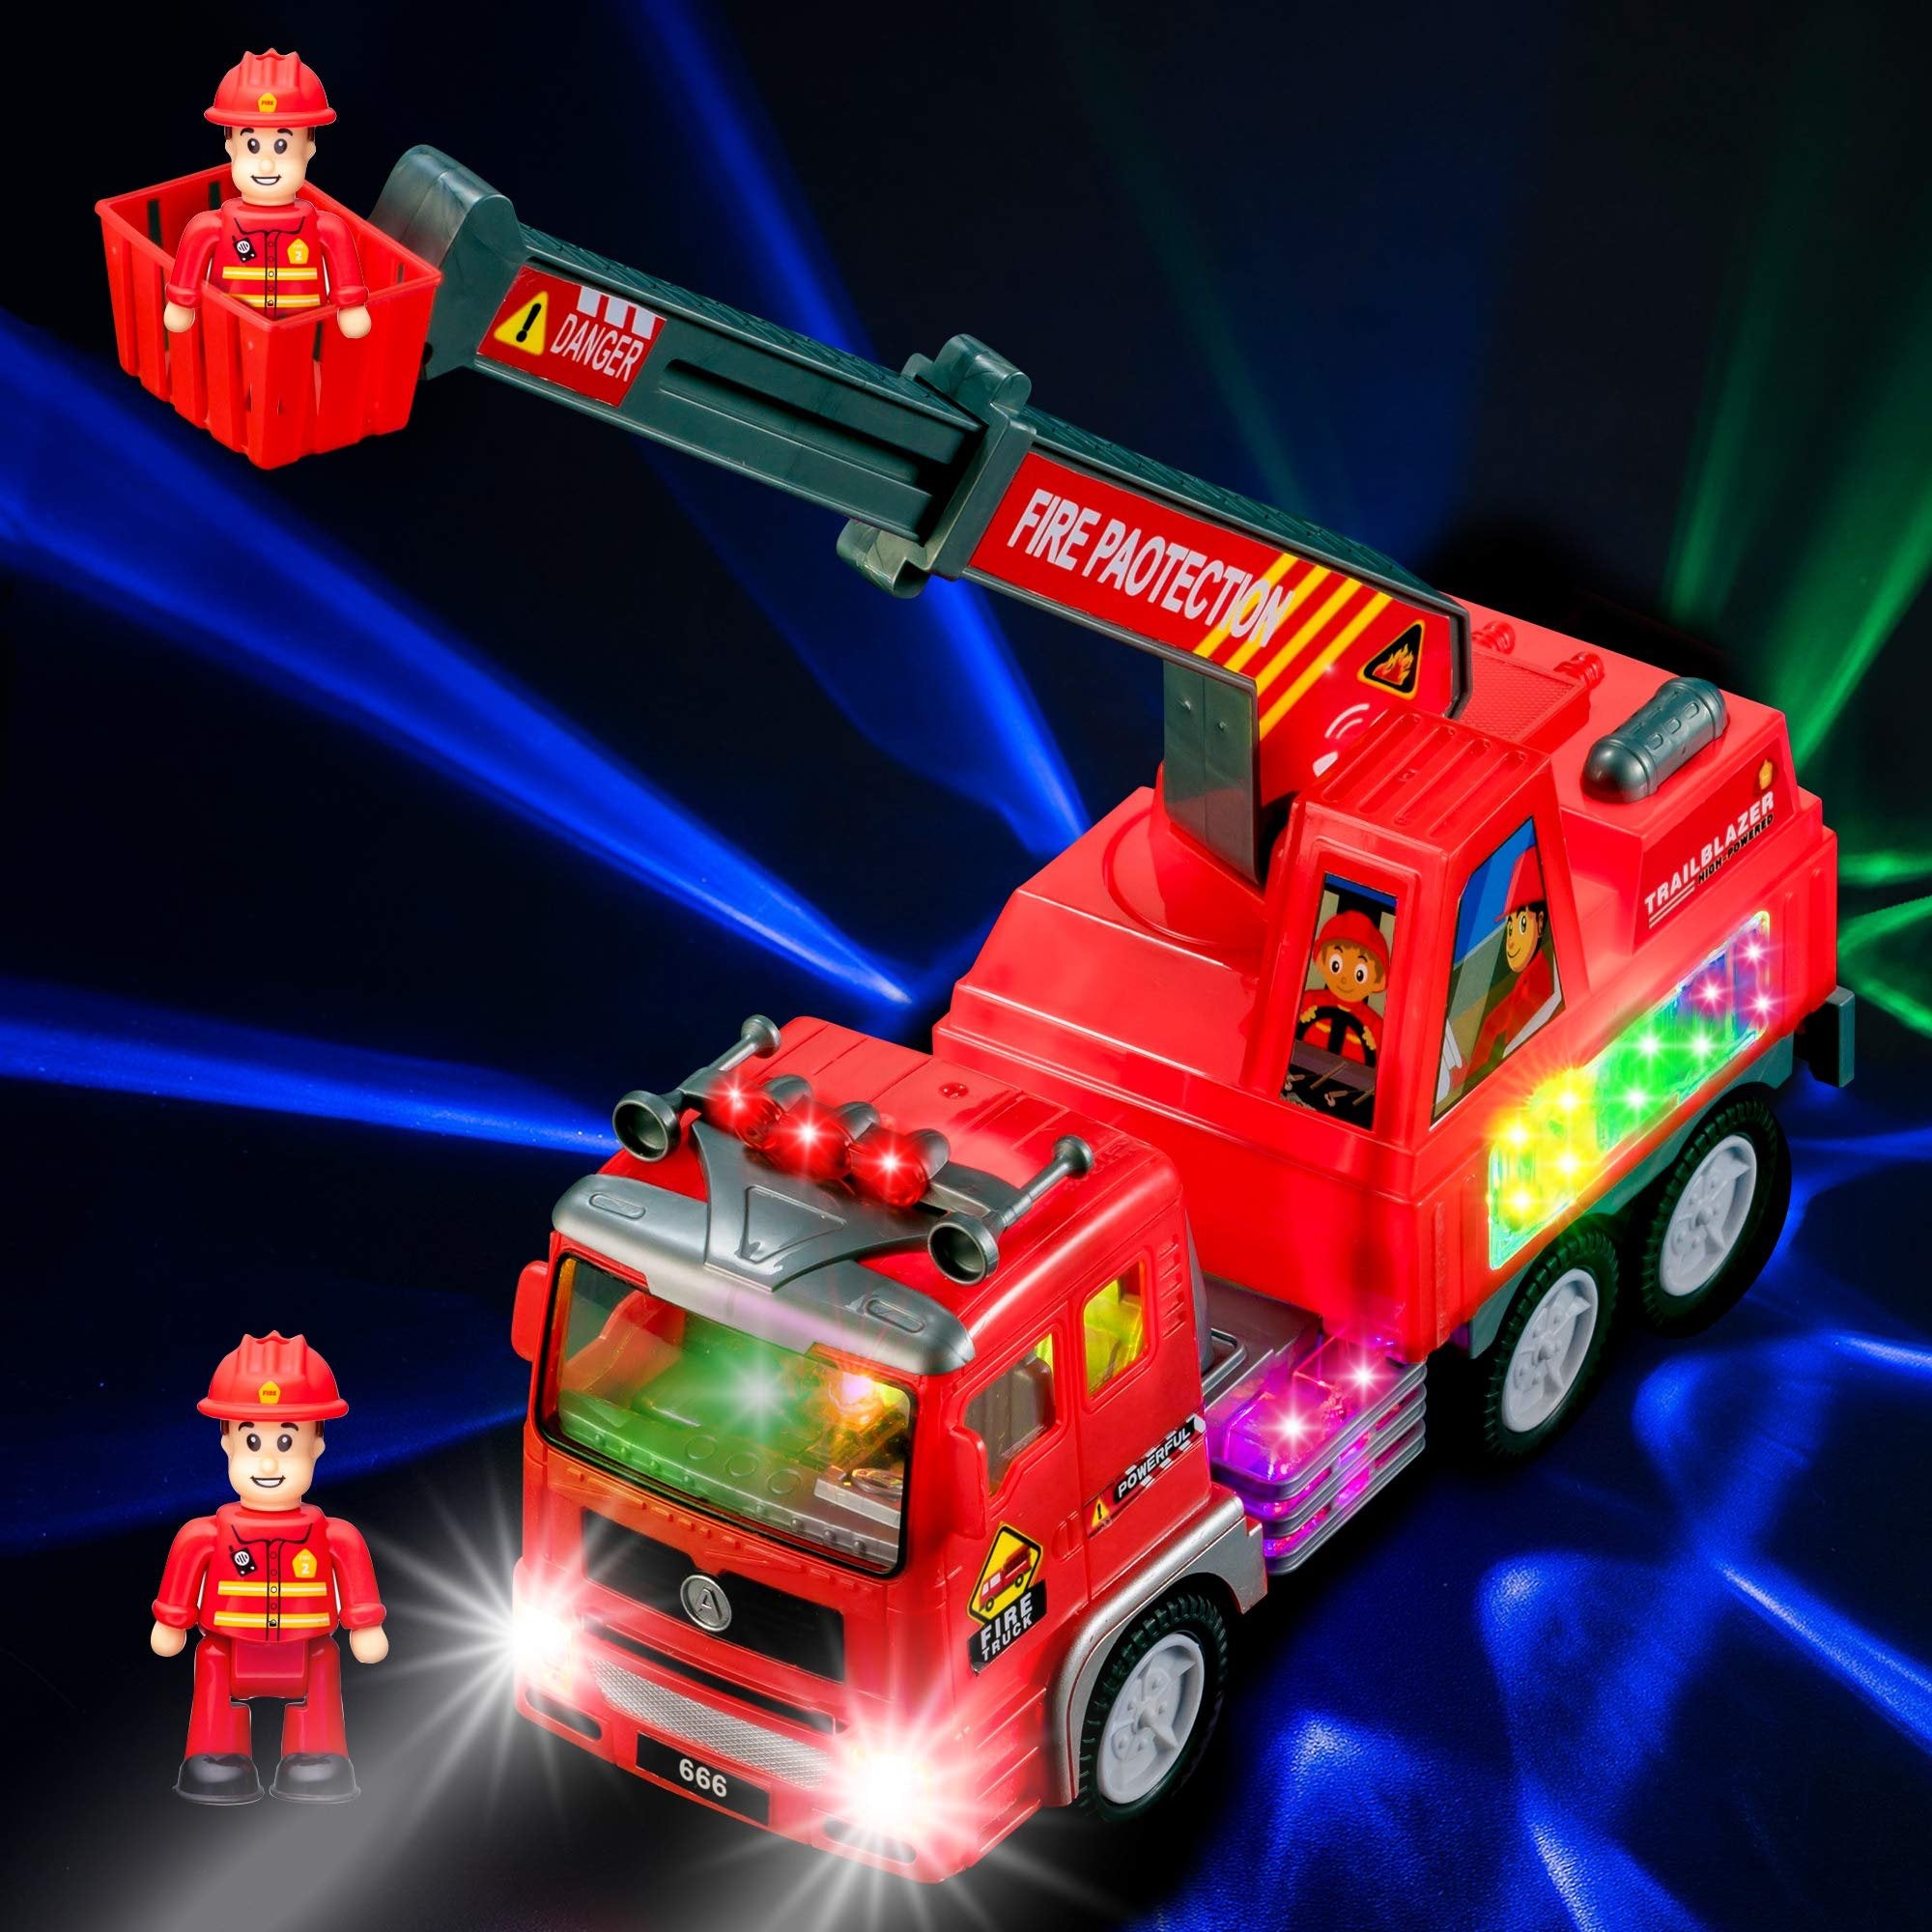 Zetz Brands Fire Engine Ladder Truck for Kids with Two Fireman Figures - 4d Lights & Real Siren Sounds | Bump and Go Toy - Automatic Steering On Contact - Imaginative Play